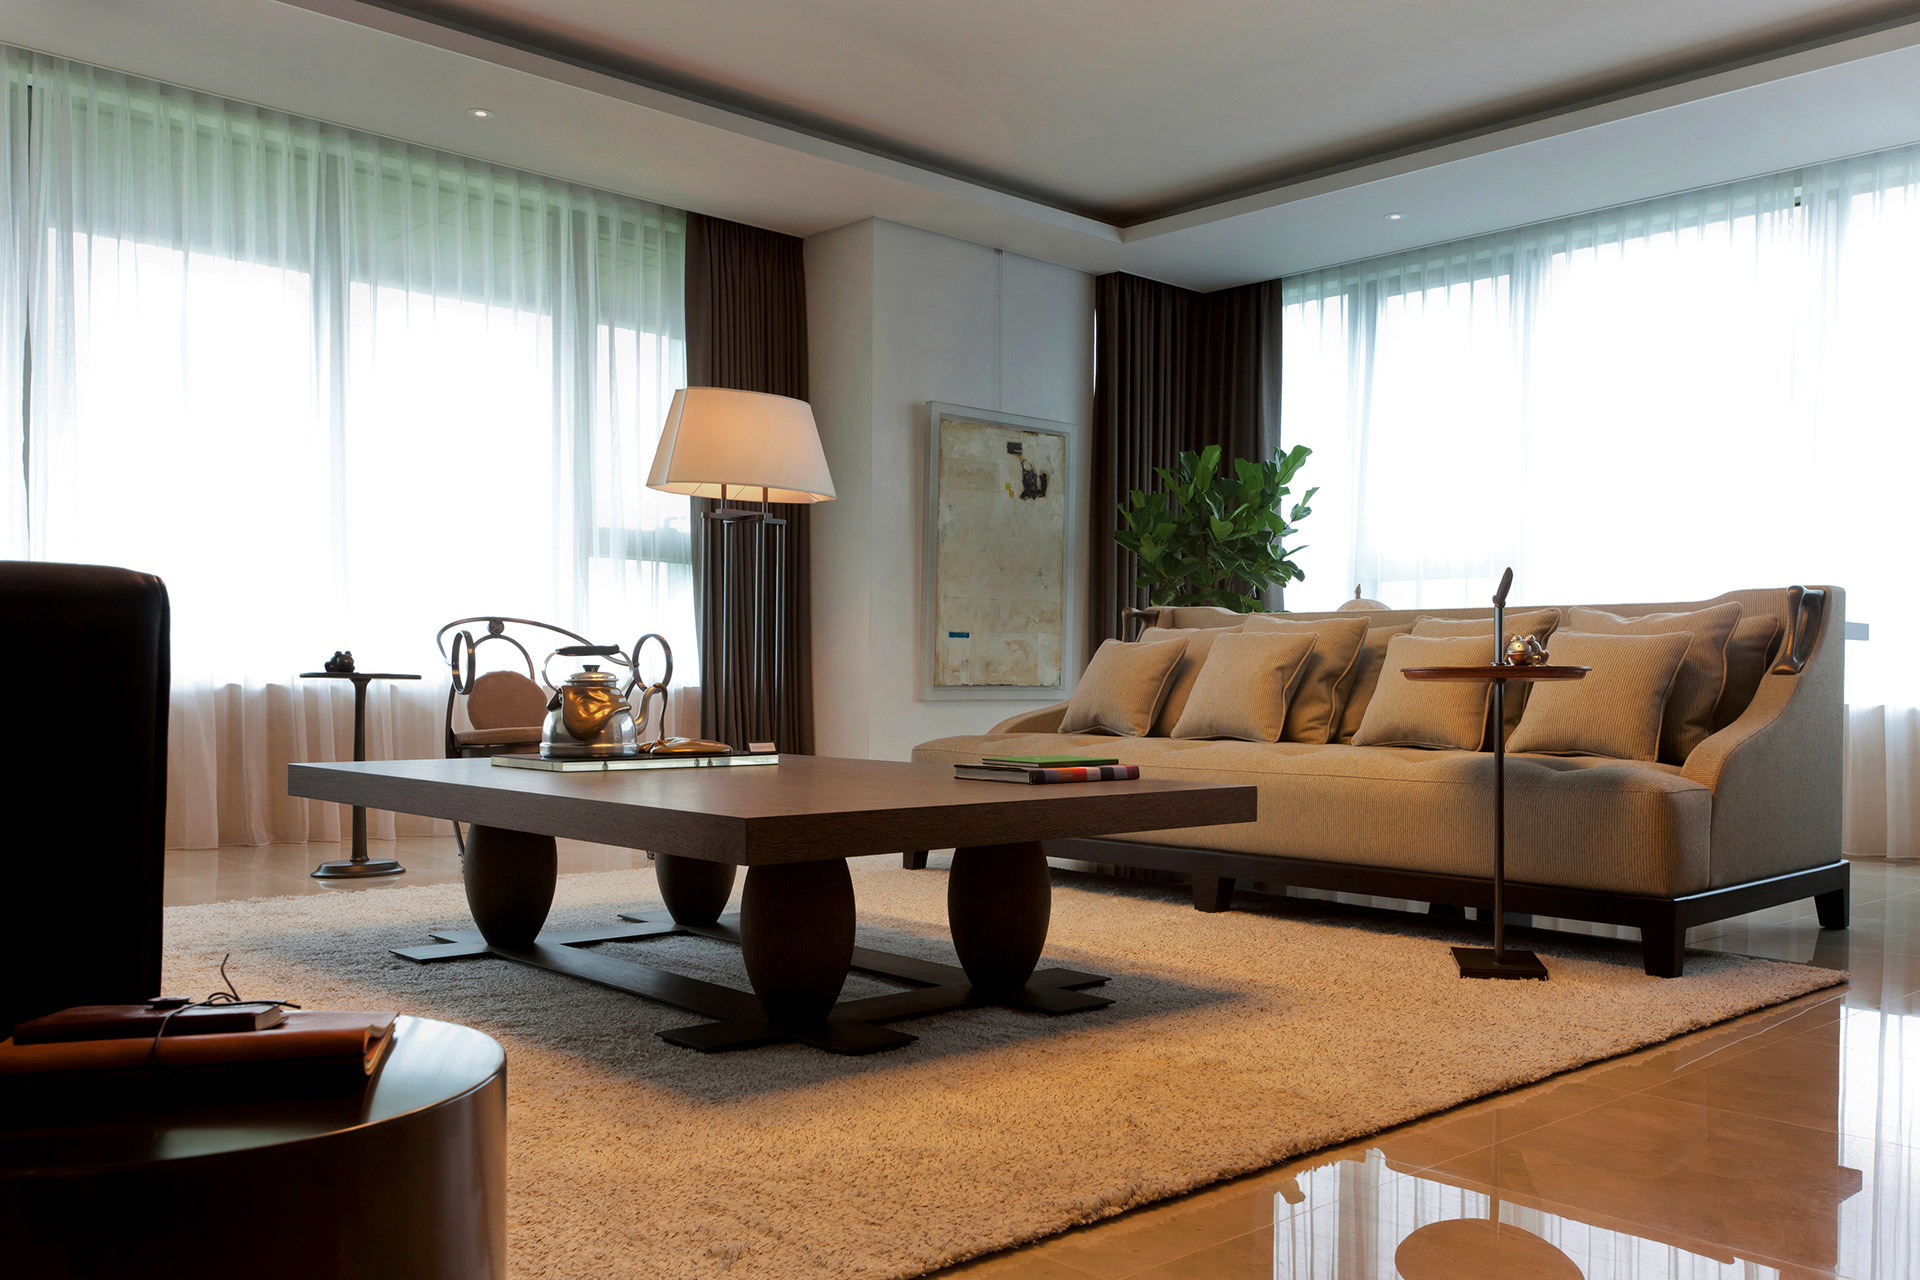 Living room of a private residence in Korea furnished with Promemoria | Promemoria